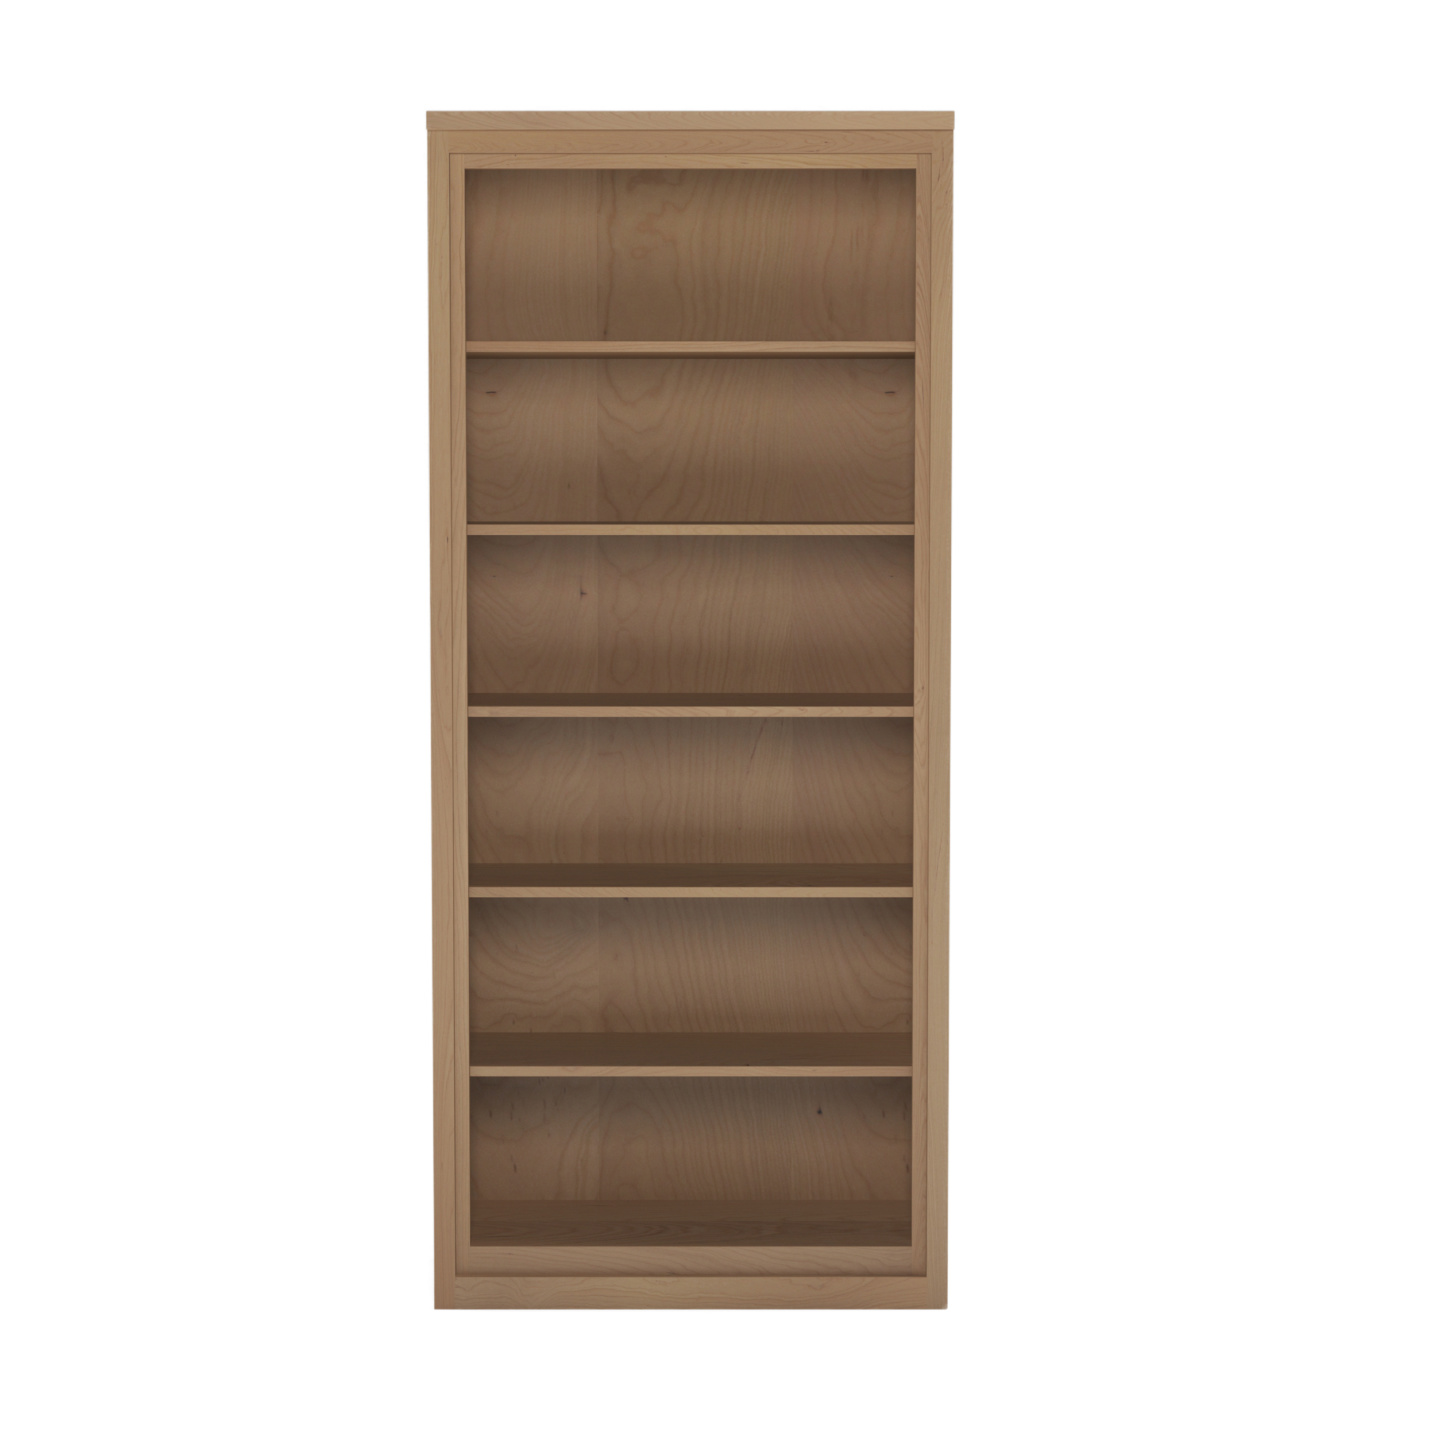 Cherry bookcase with solid cherry trim